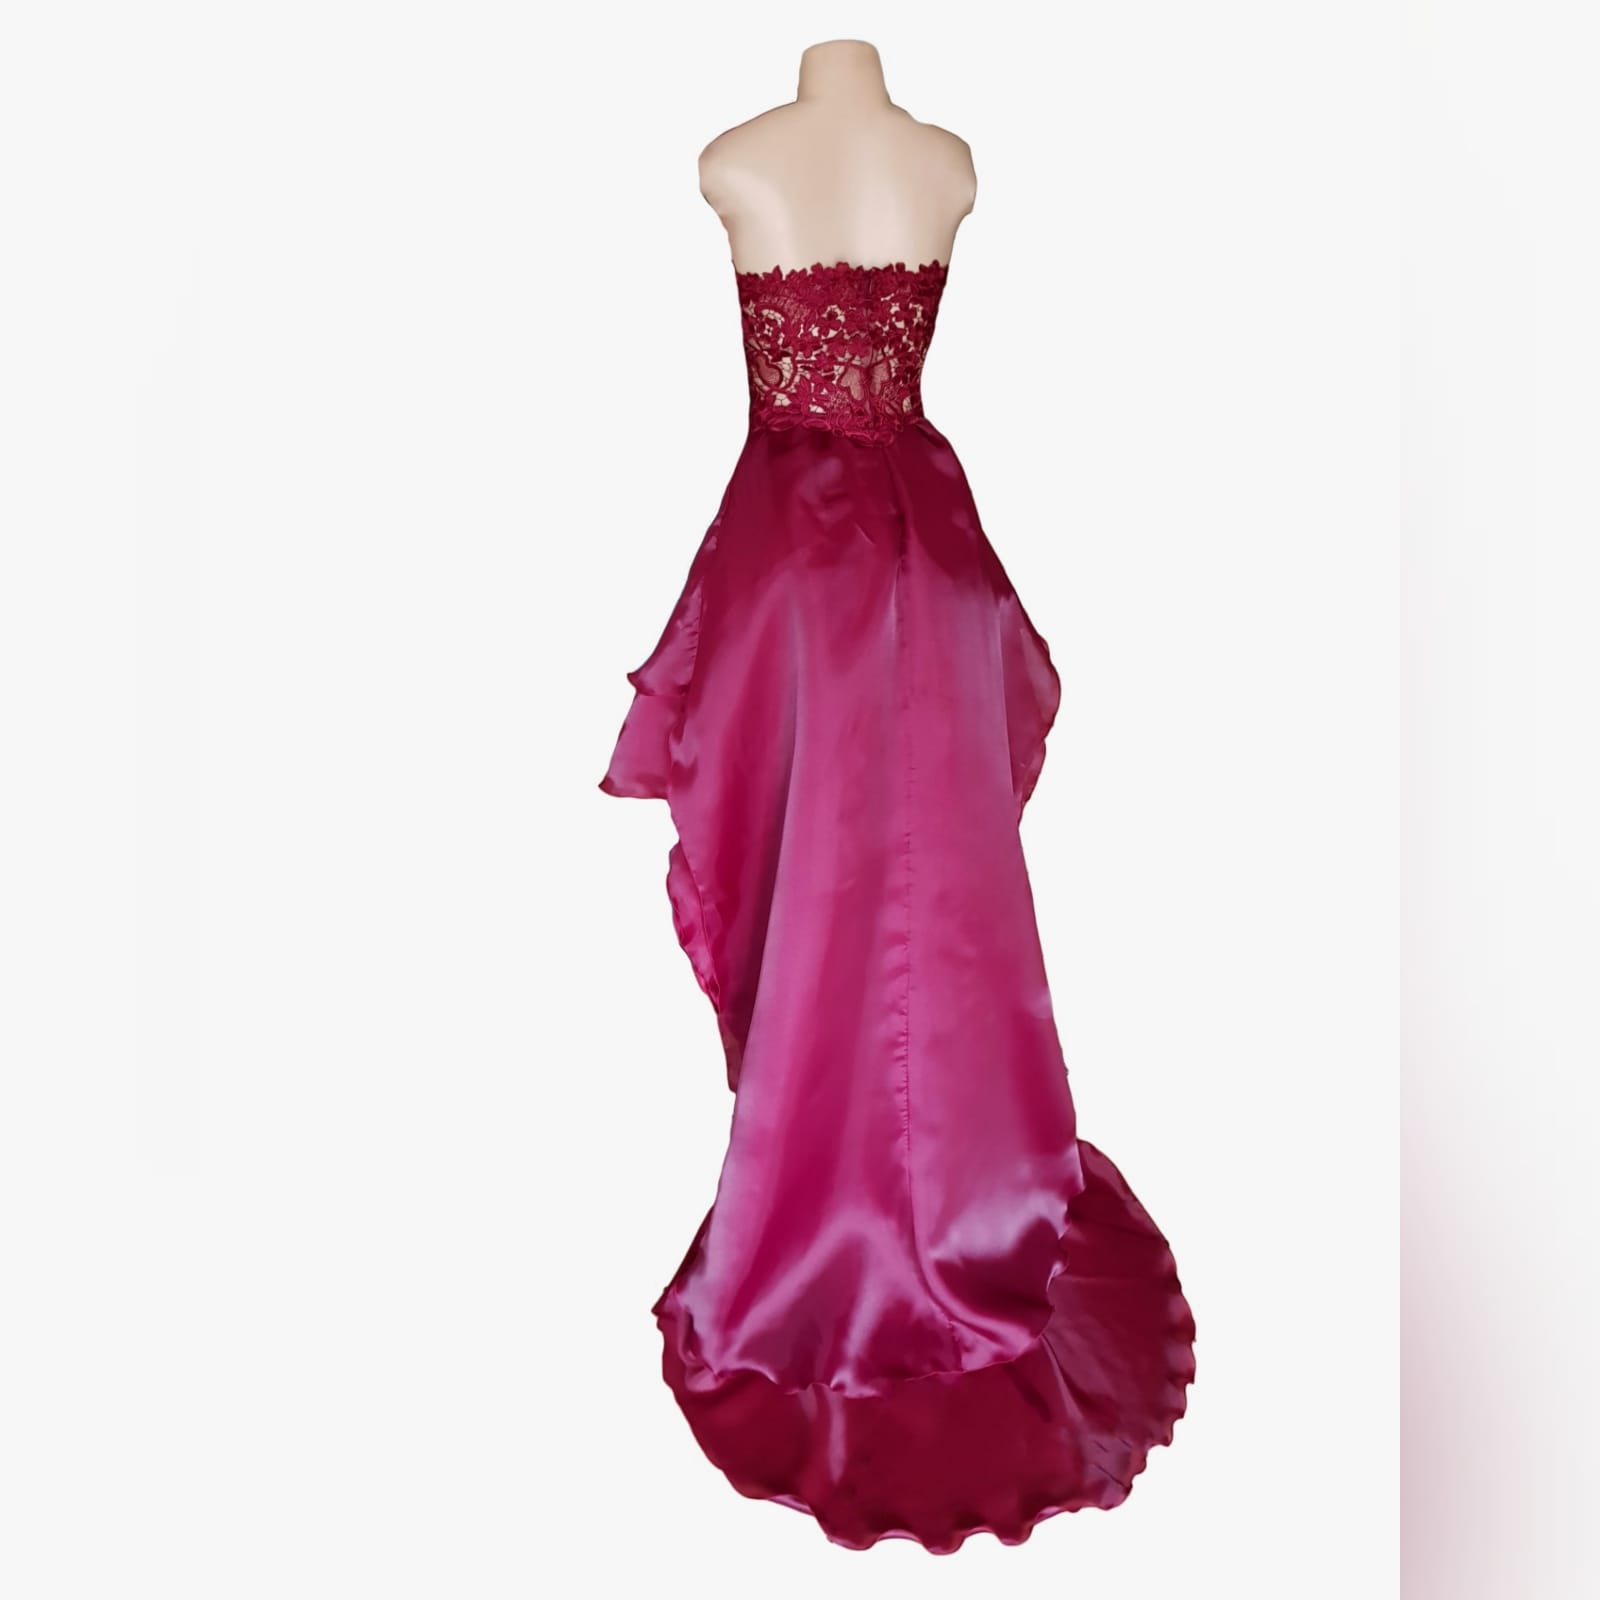 Dark red high low evening dress 8 the perfect dark red evening dress for your prom night if you want to look elegant yet adorable. With a lace bodice and a double layer hi - lo flowy bottom for a slight dramatic effect.